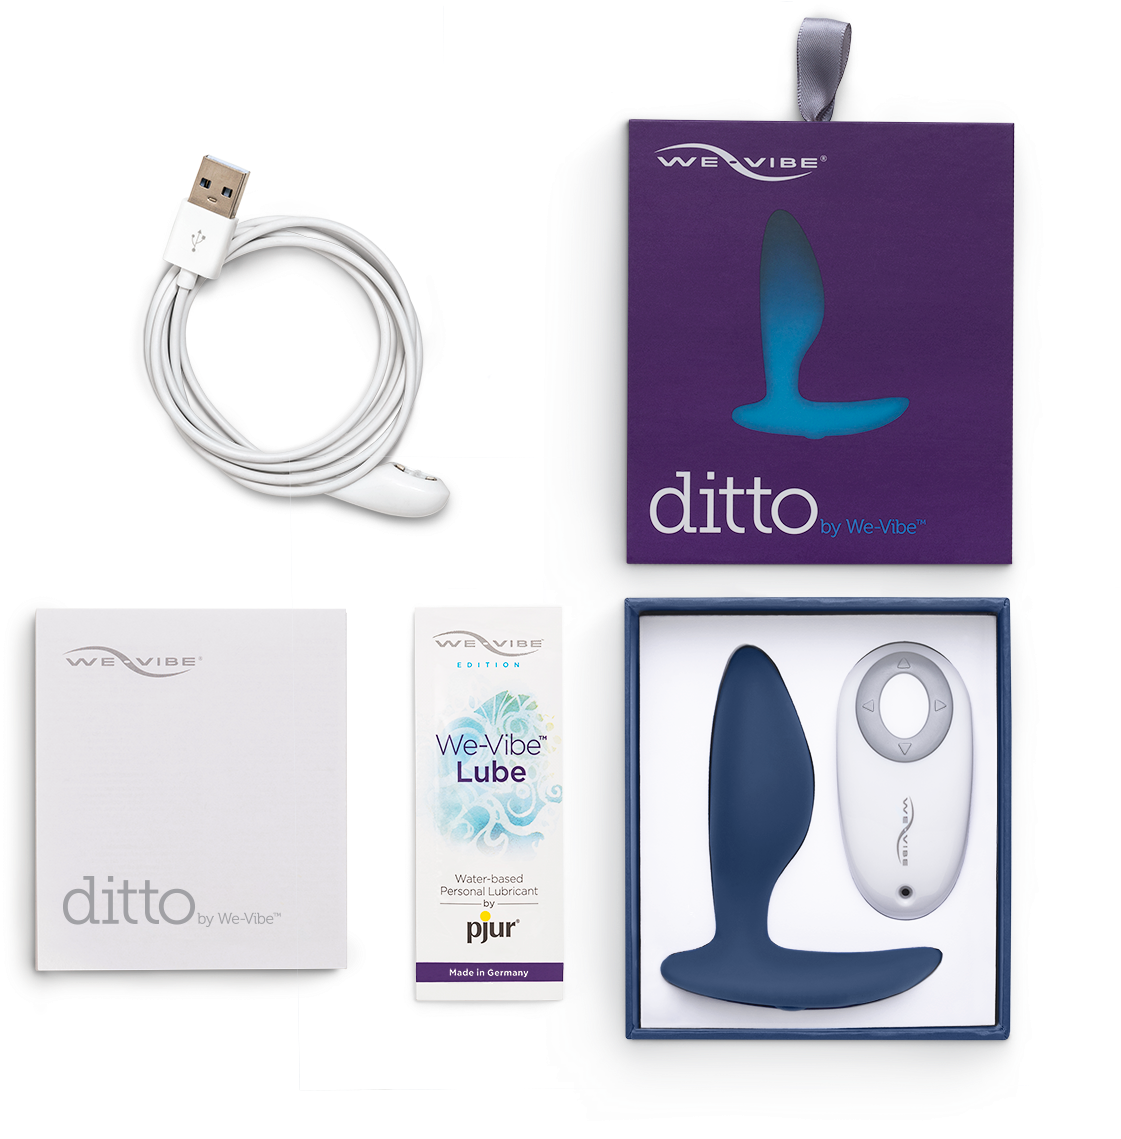 Ditto Boxcontent Blue-1200 - We-vibe Ditto Purple ウィーバイブ ディット パープル (1200x1200), Png Download